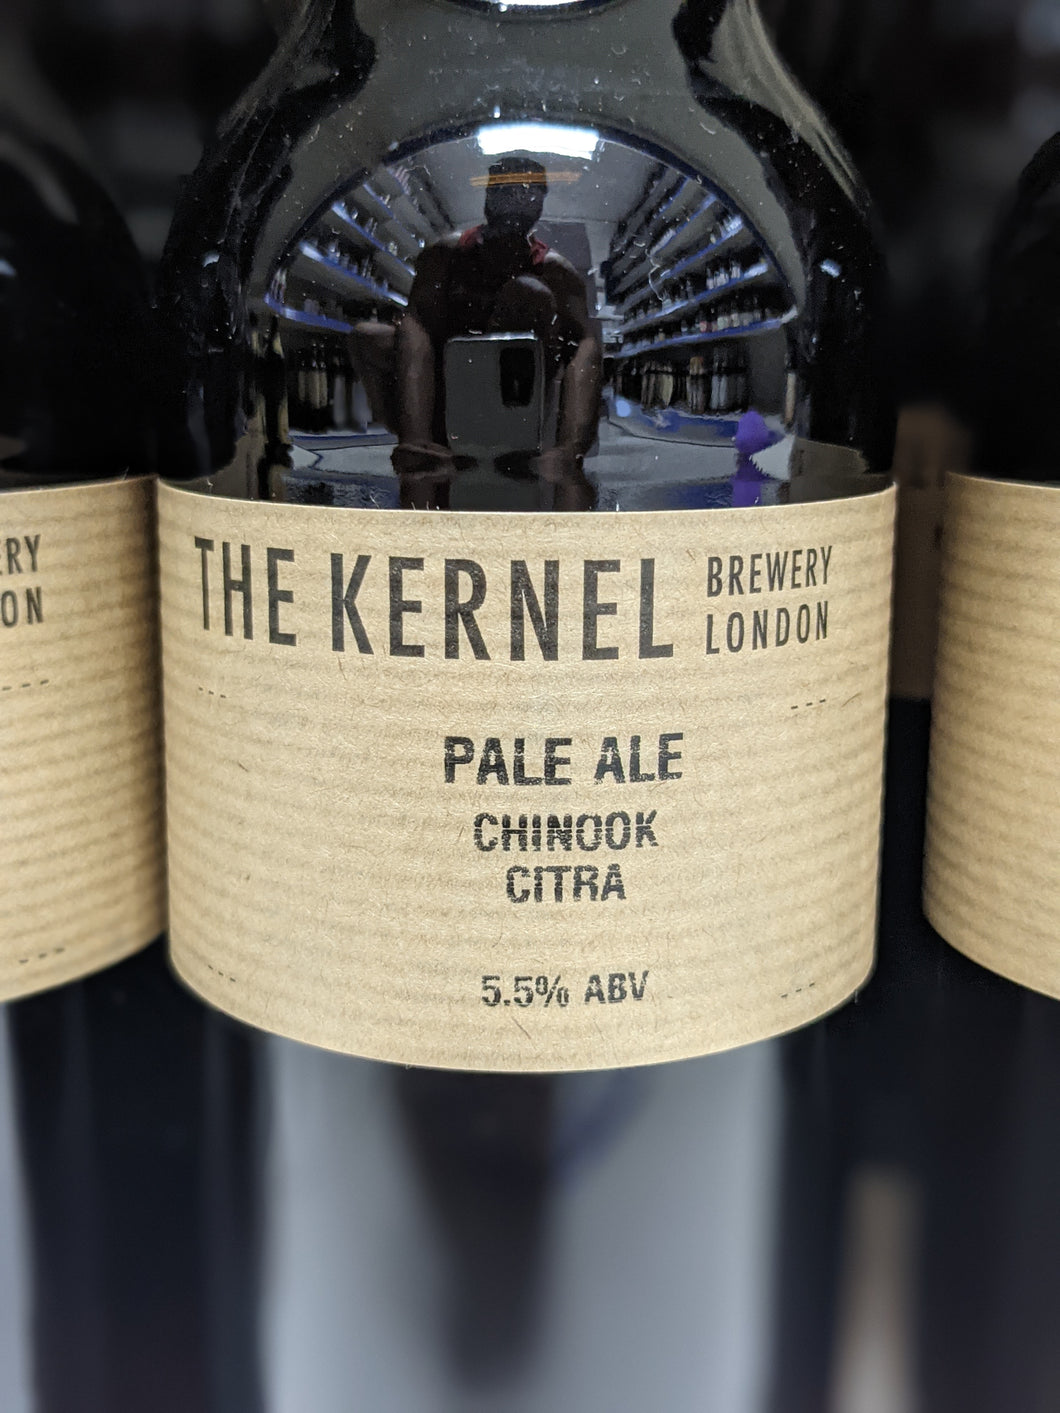 Pale Ale Chinook Citra - The Kernel Brewery - Pale Ale, 5.5%, 500ml Bottle